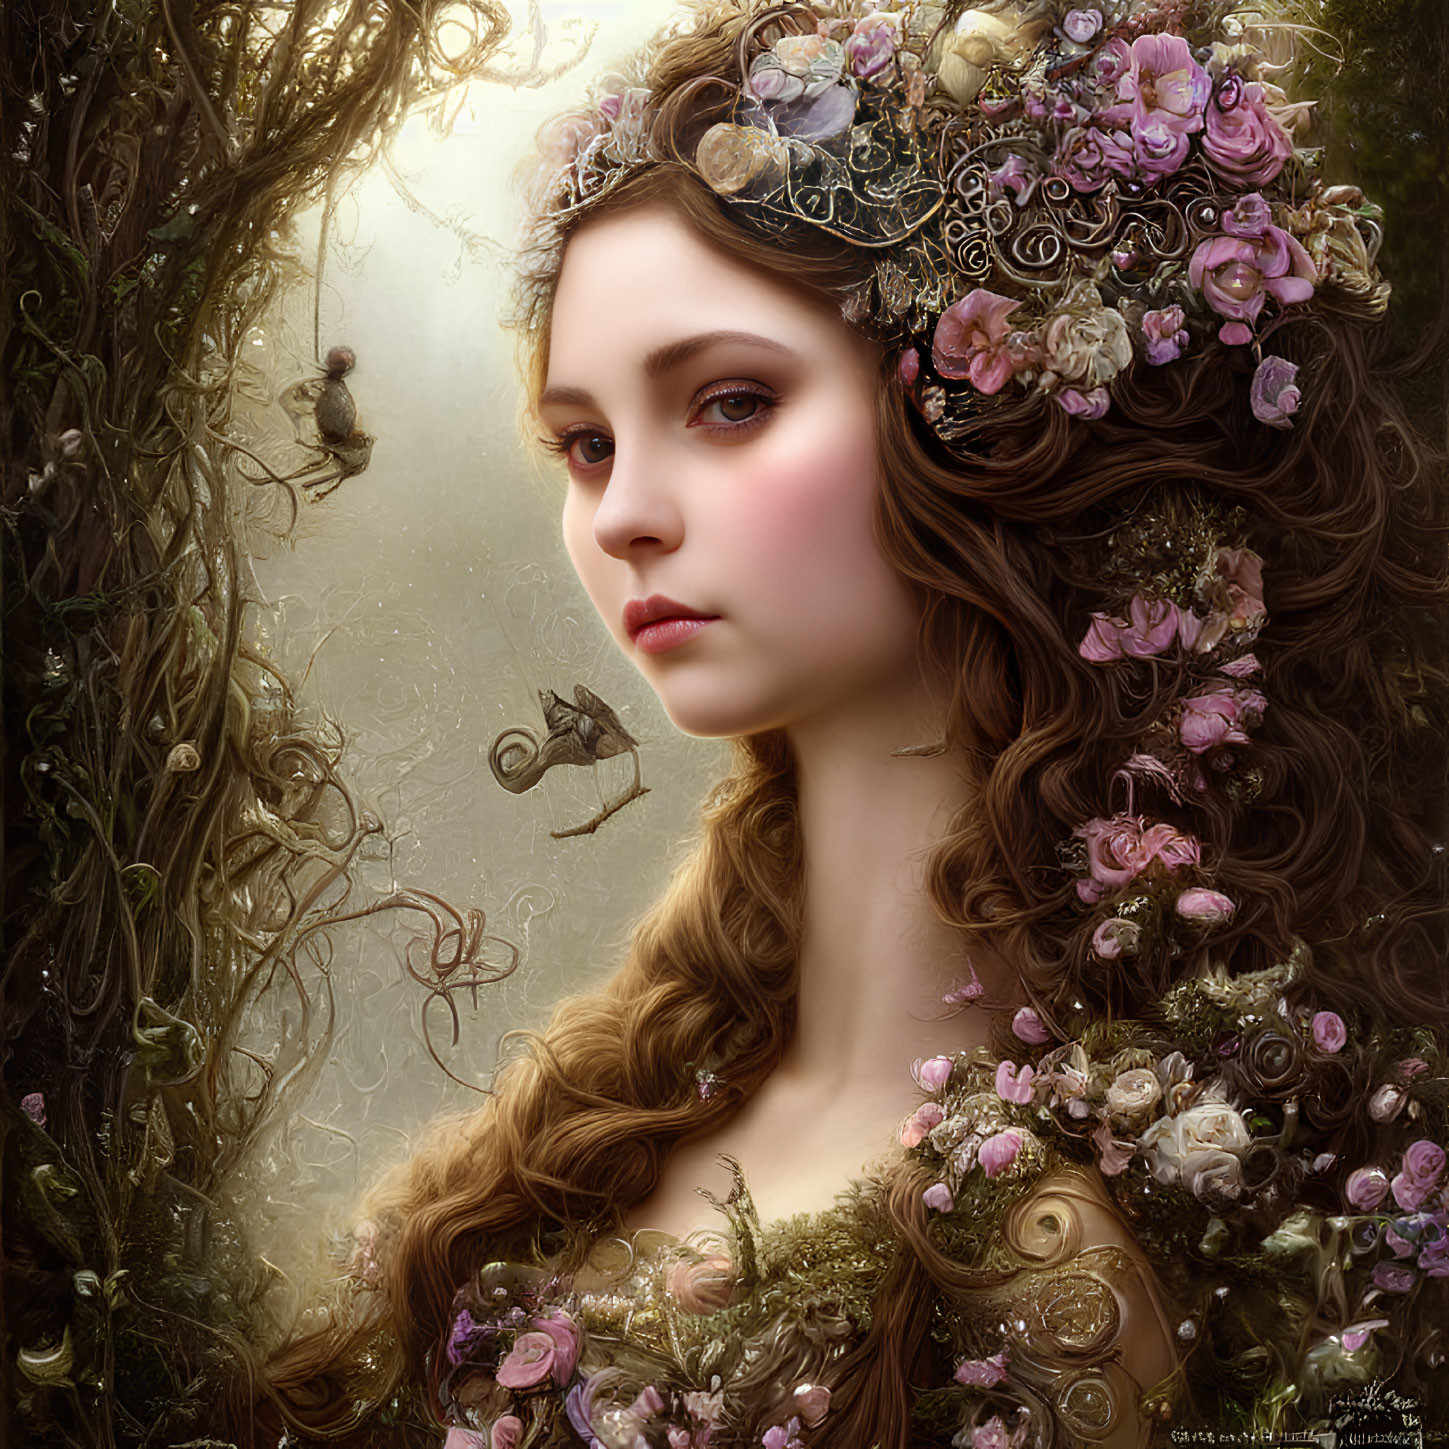 Woman with Flowered Hair and Fantasy Backdrop